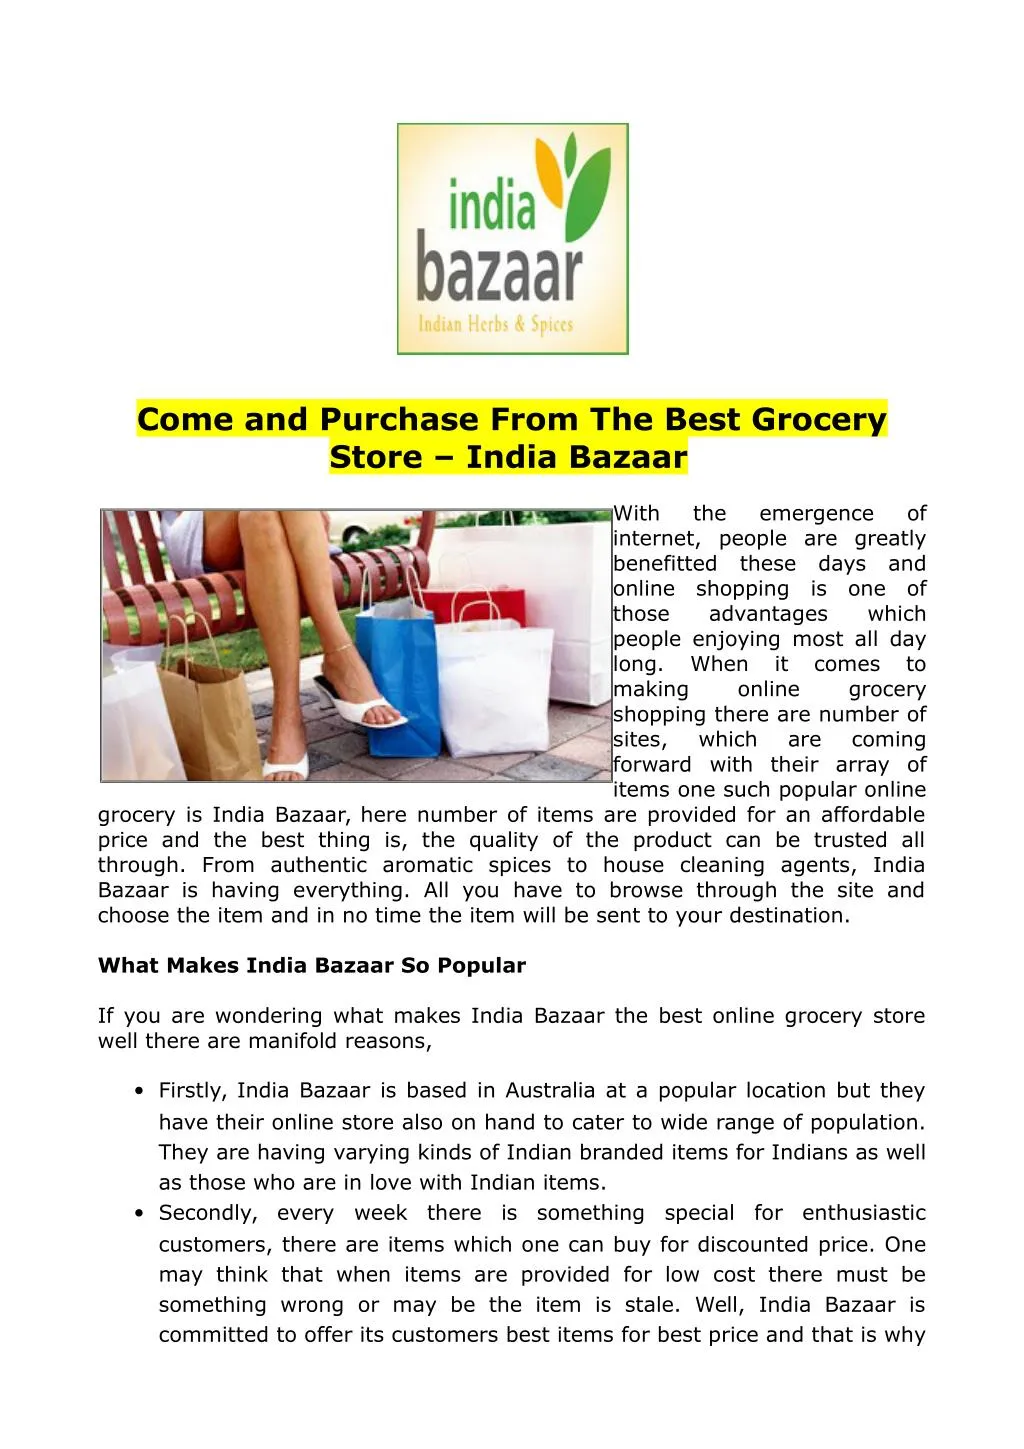 come and purchase from the best grocery store